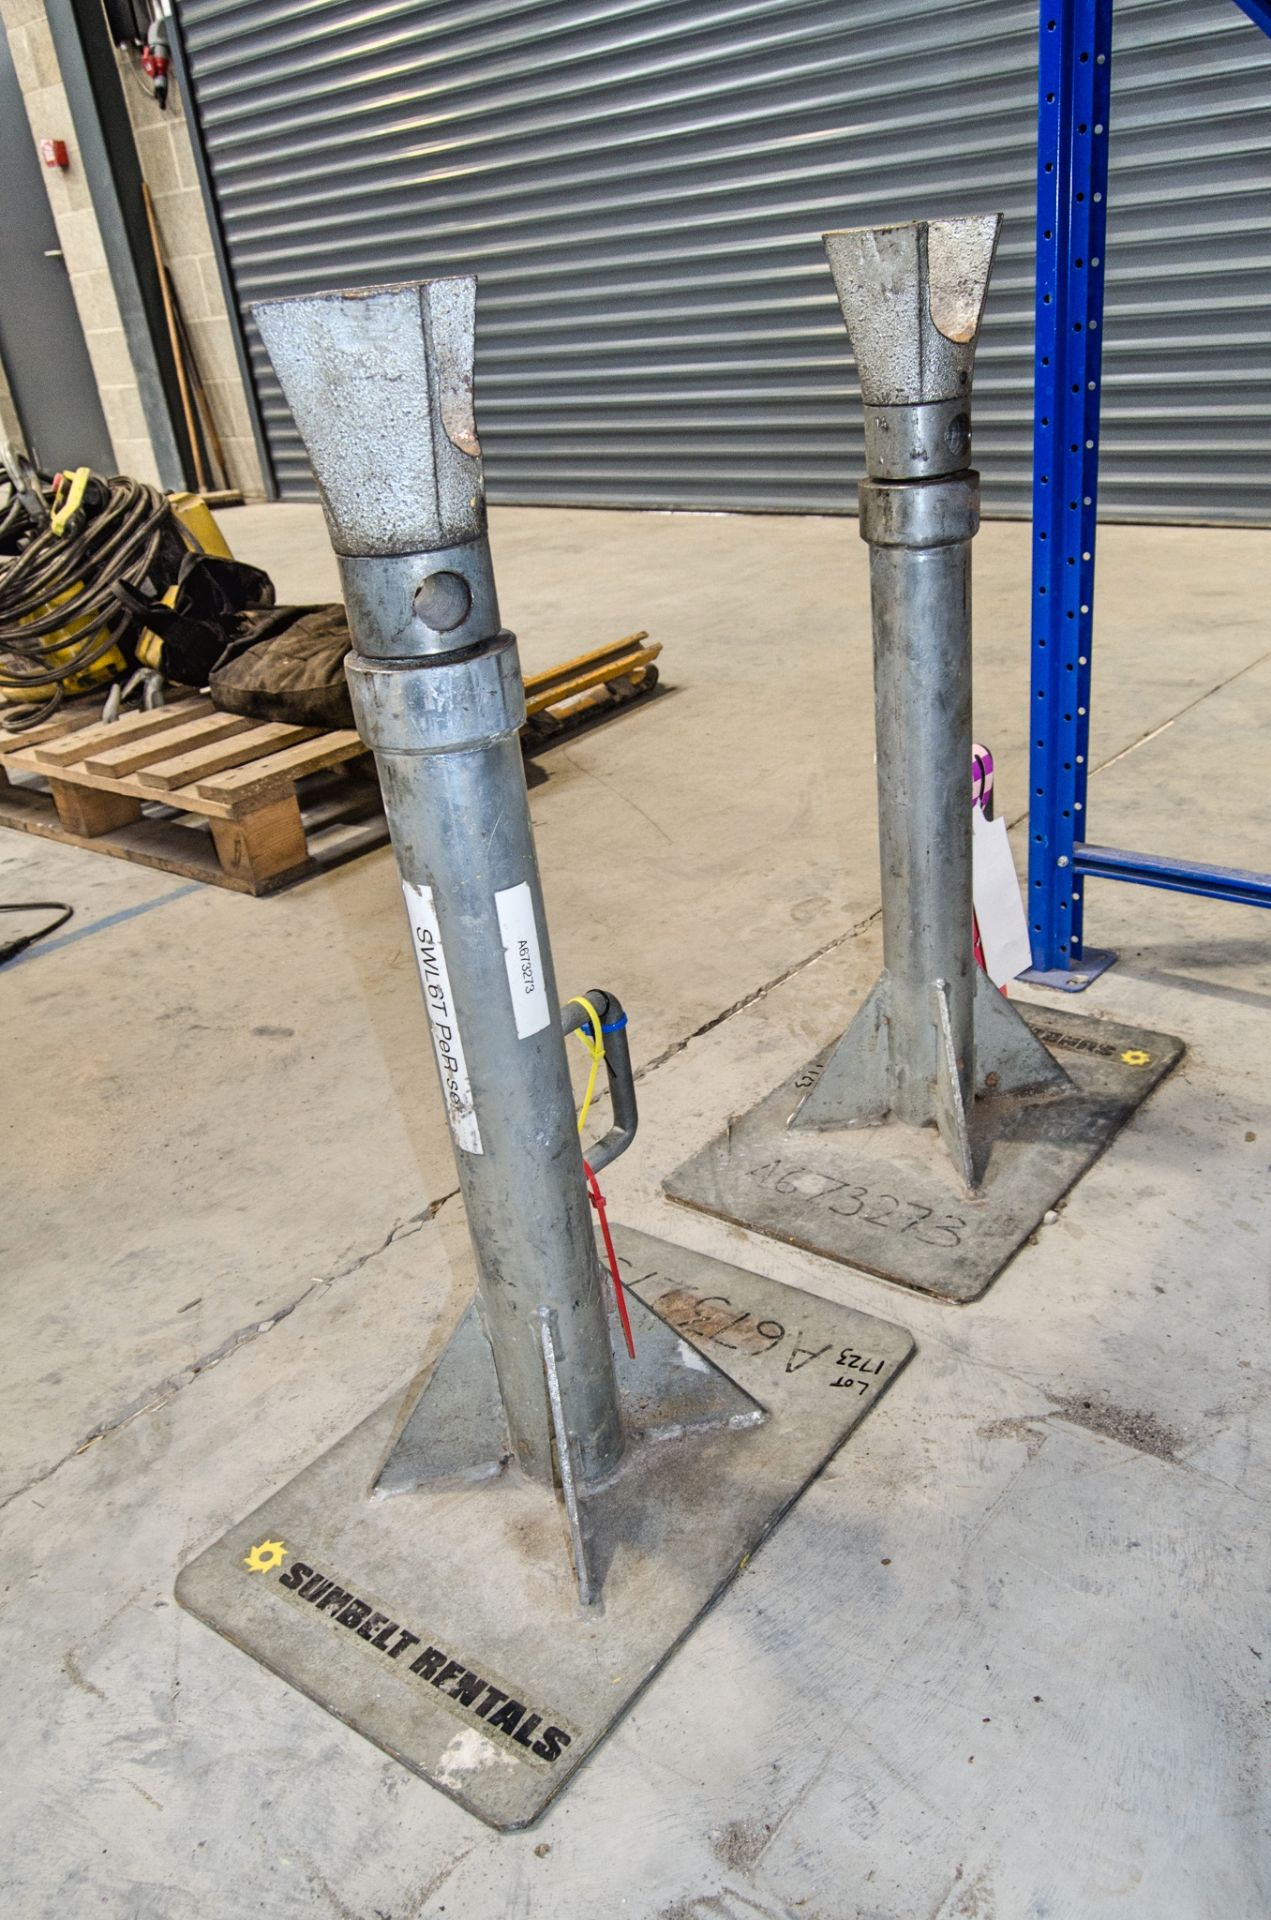 Pair of TWS cable drum stands S.W.L. 6000kg (as a pair) A673273